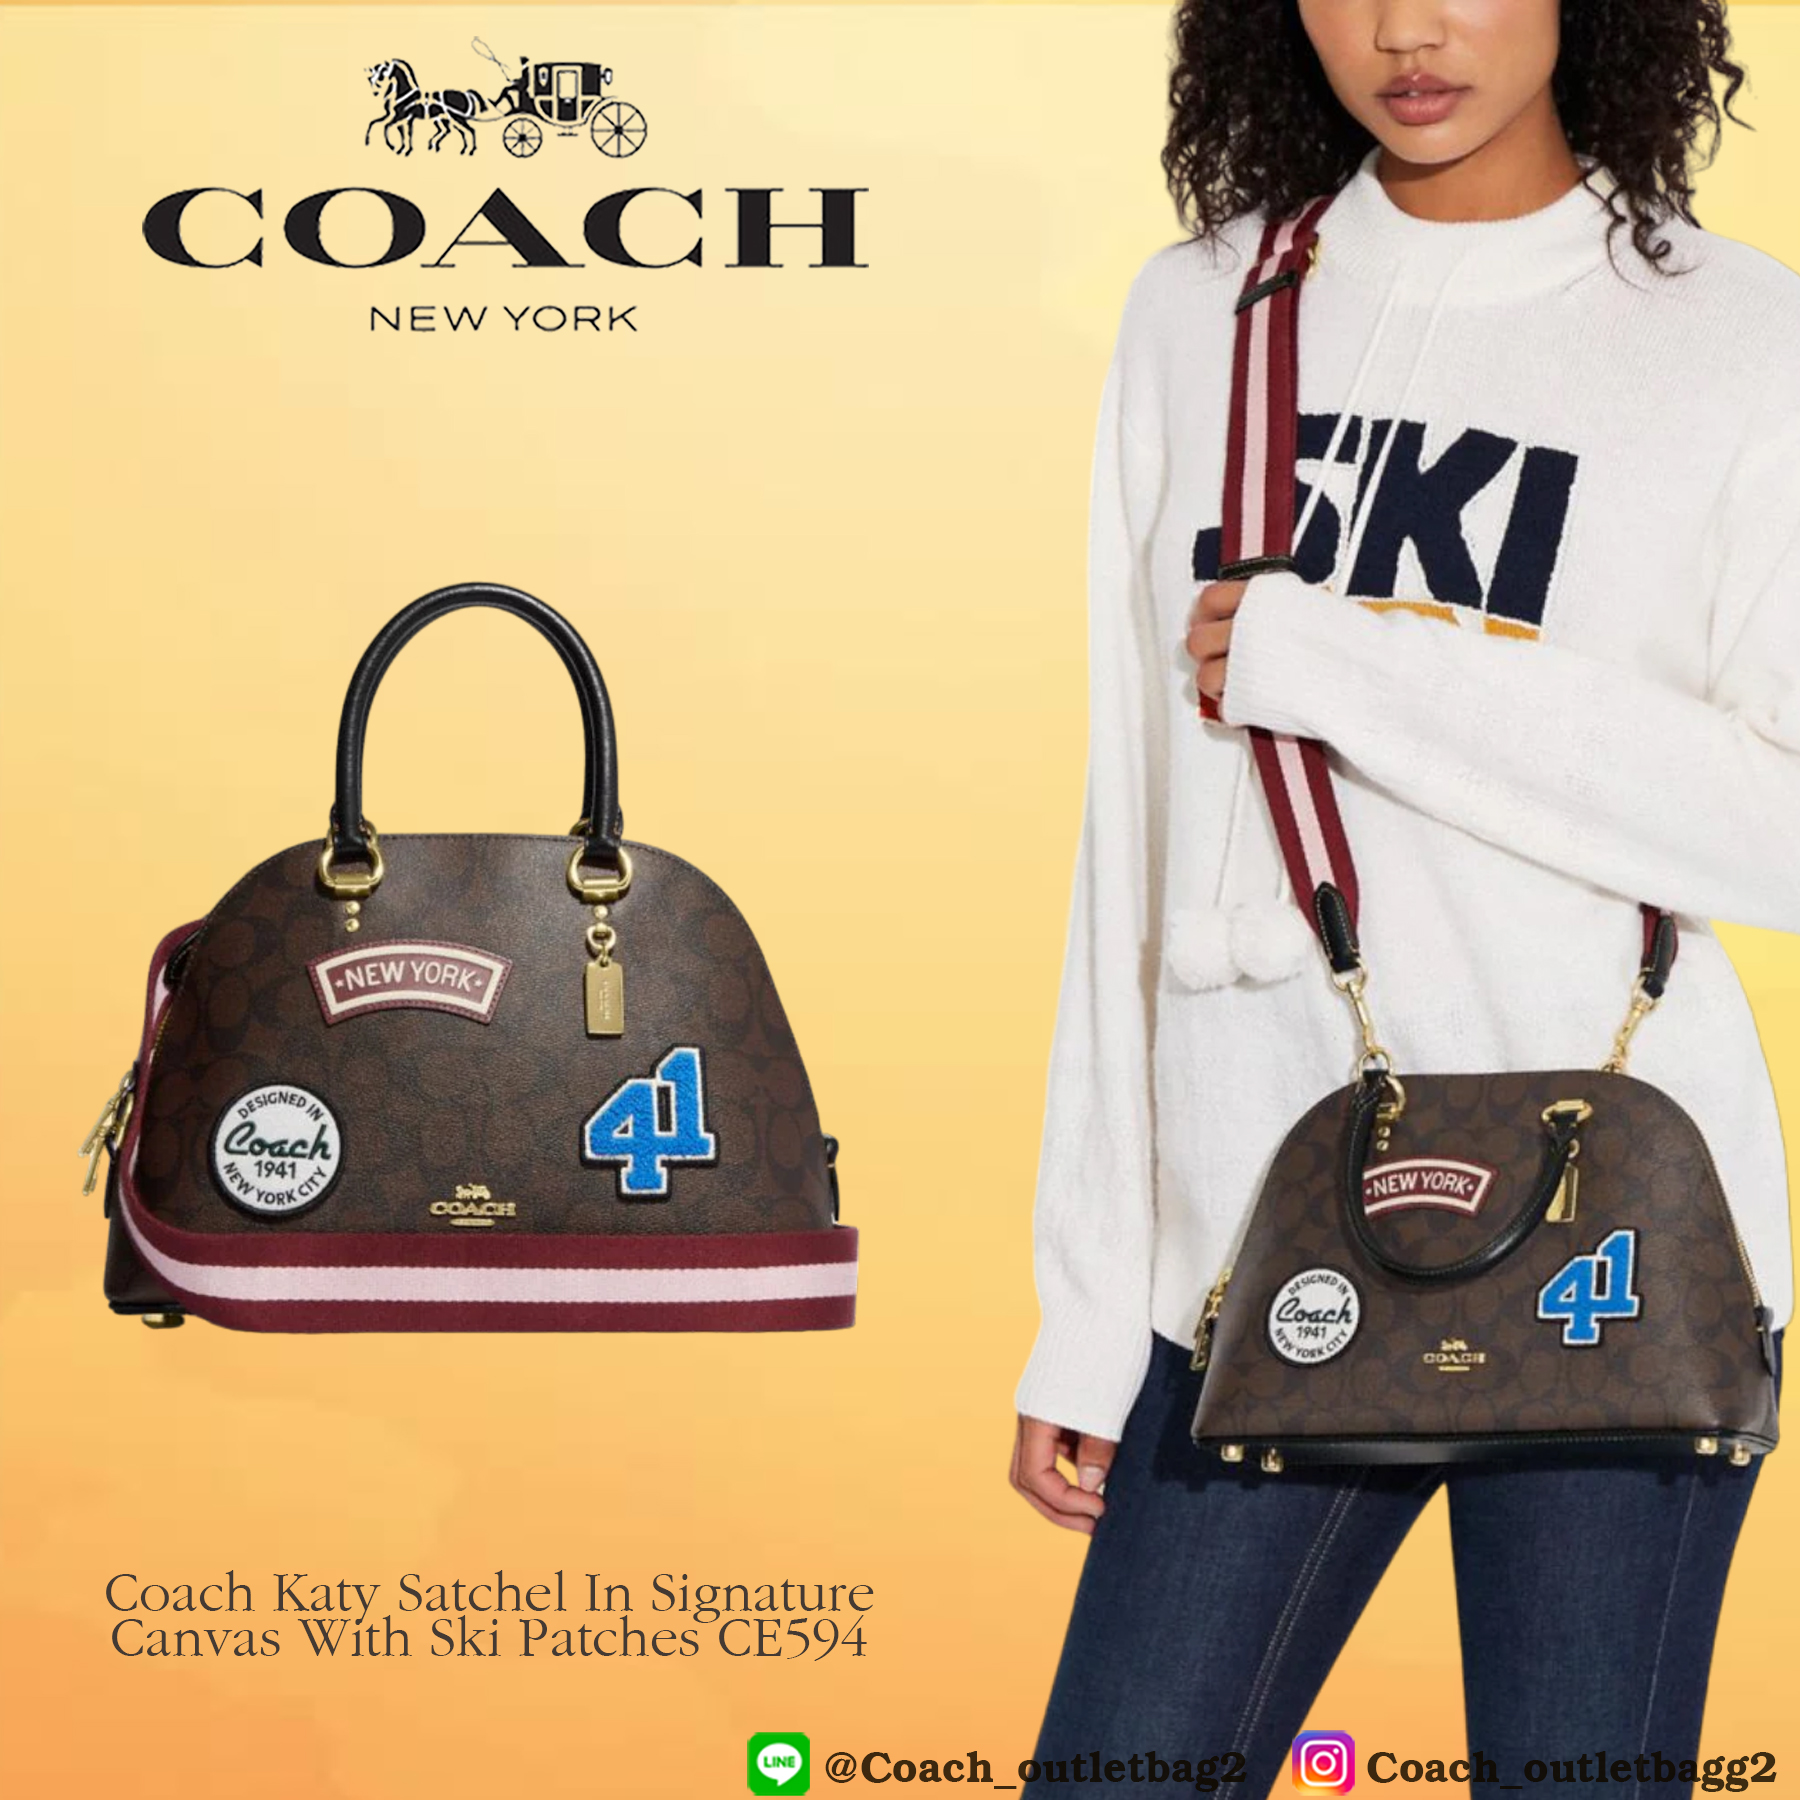 Coach Katy Satchel In Signature Canvas With Ski Patches CE594 